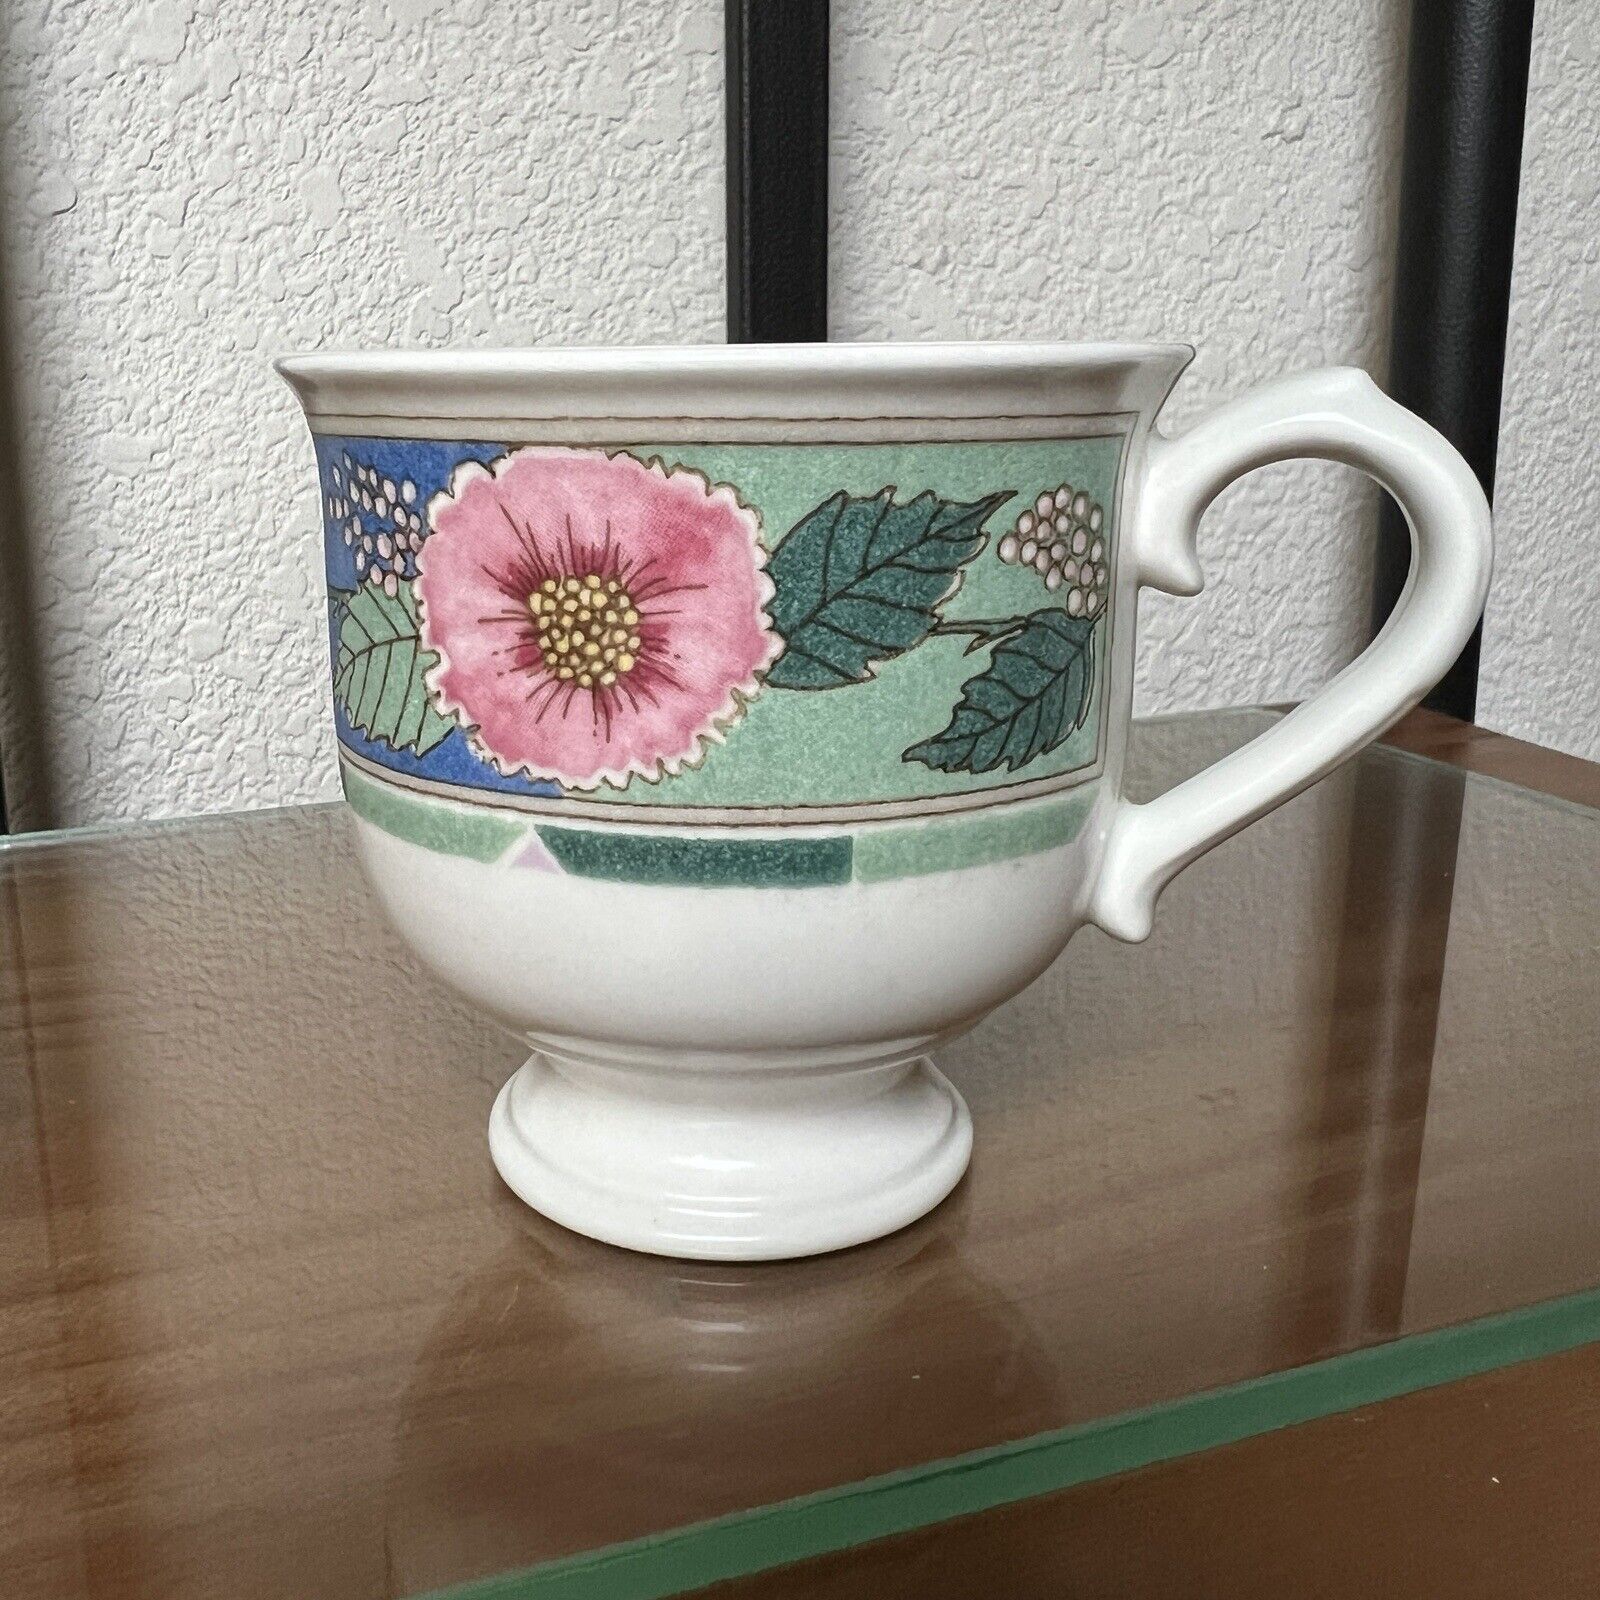 Mikasa “Chateau” Vintage Footed Cup Coffee Mug Japan Floral 1980s Replacement